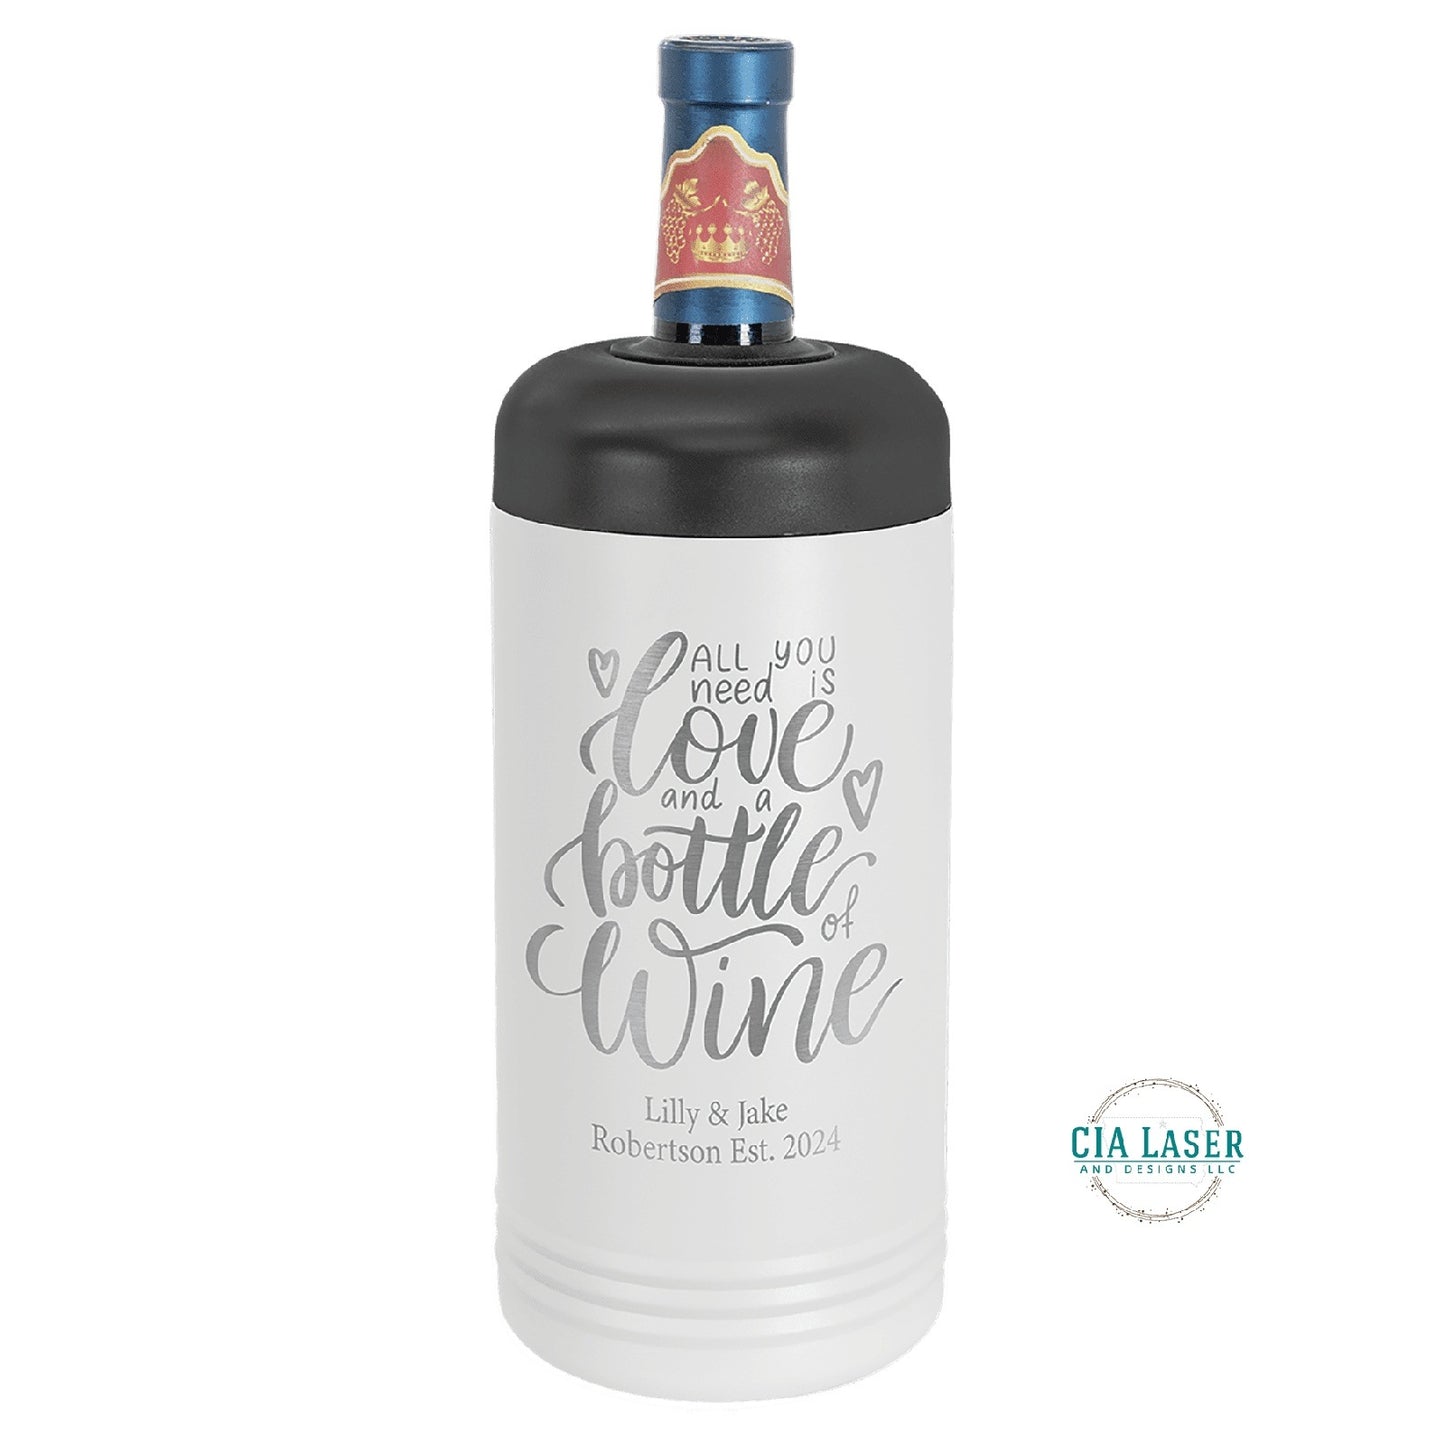 Personalized Wine Cooler, Engraved Wine Cooler, Wine Cooler, Insulated Wine Cooler, Insulated Wine Chiller